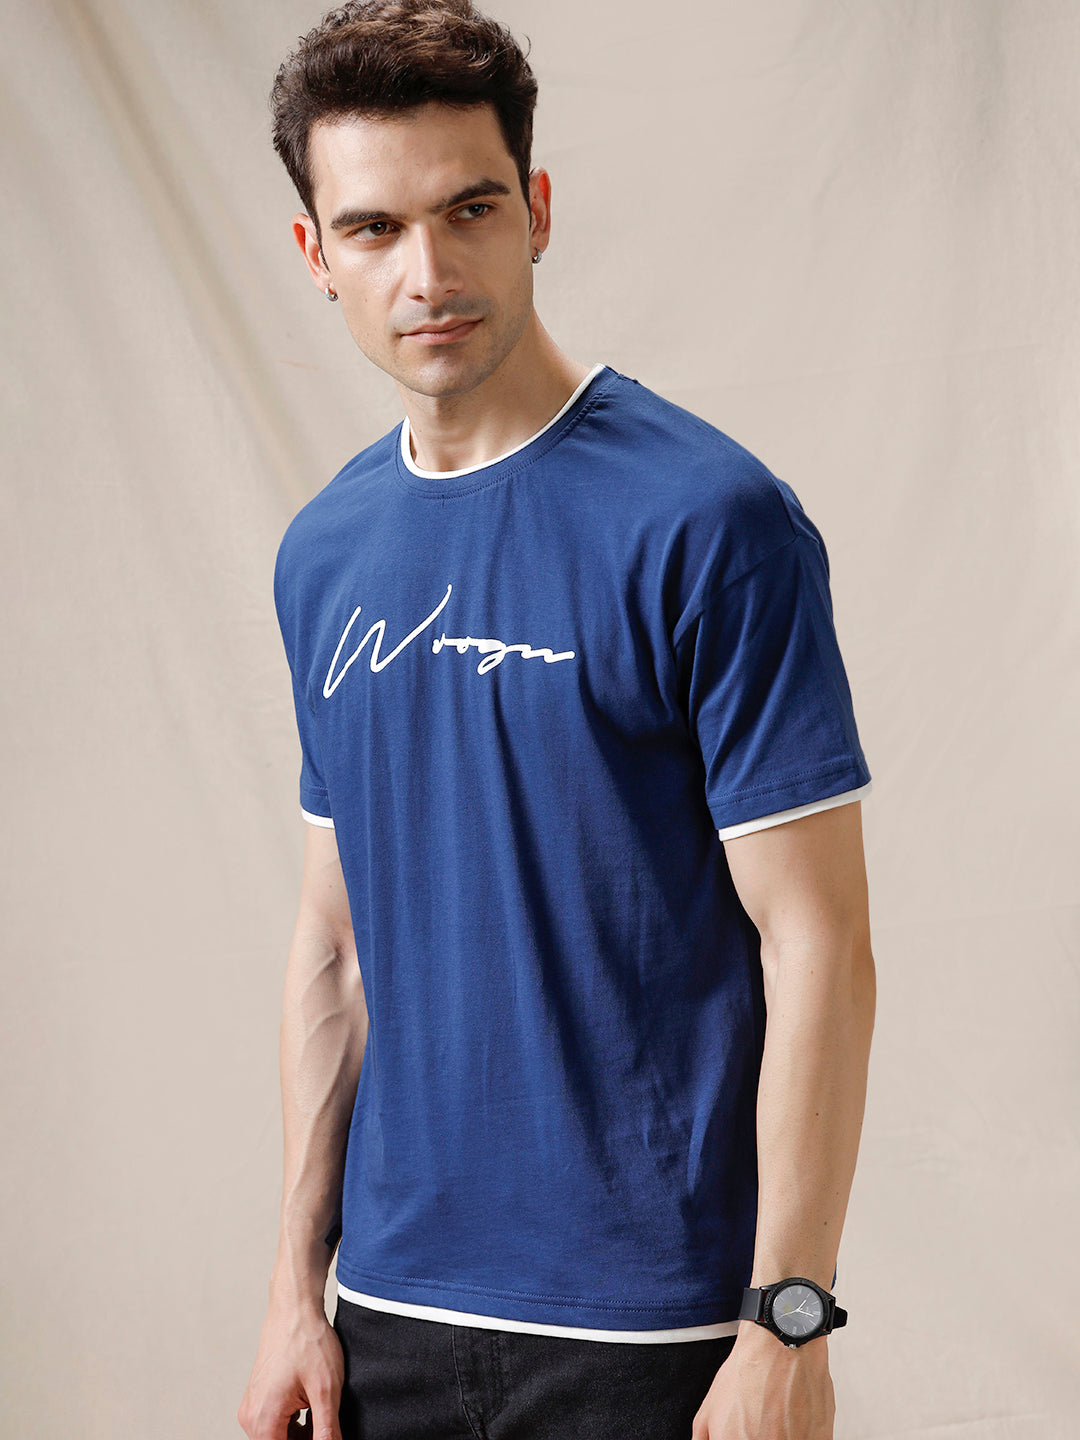 Blue Typography Printed T-Shirt